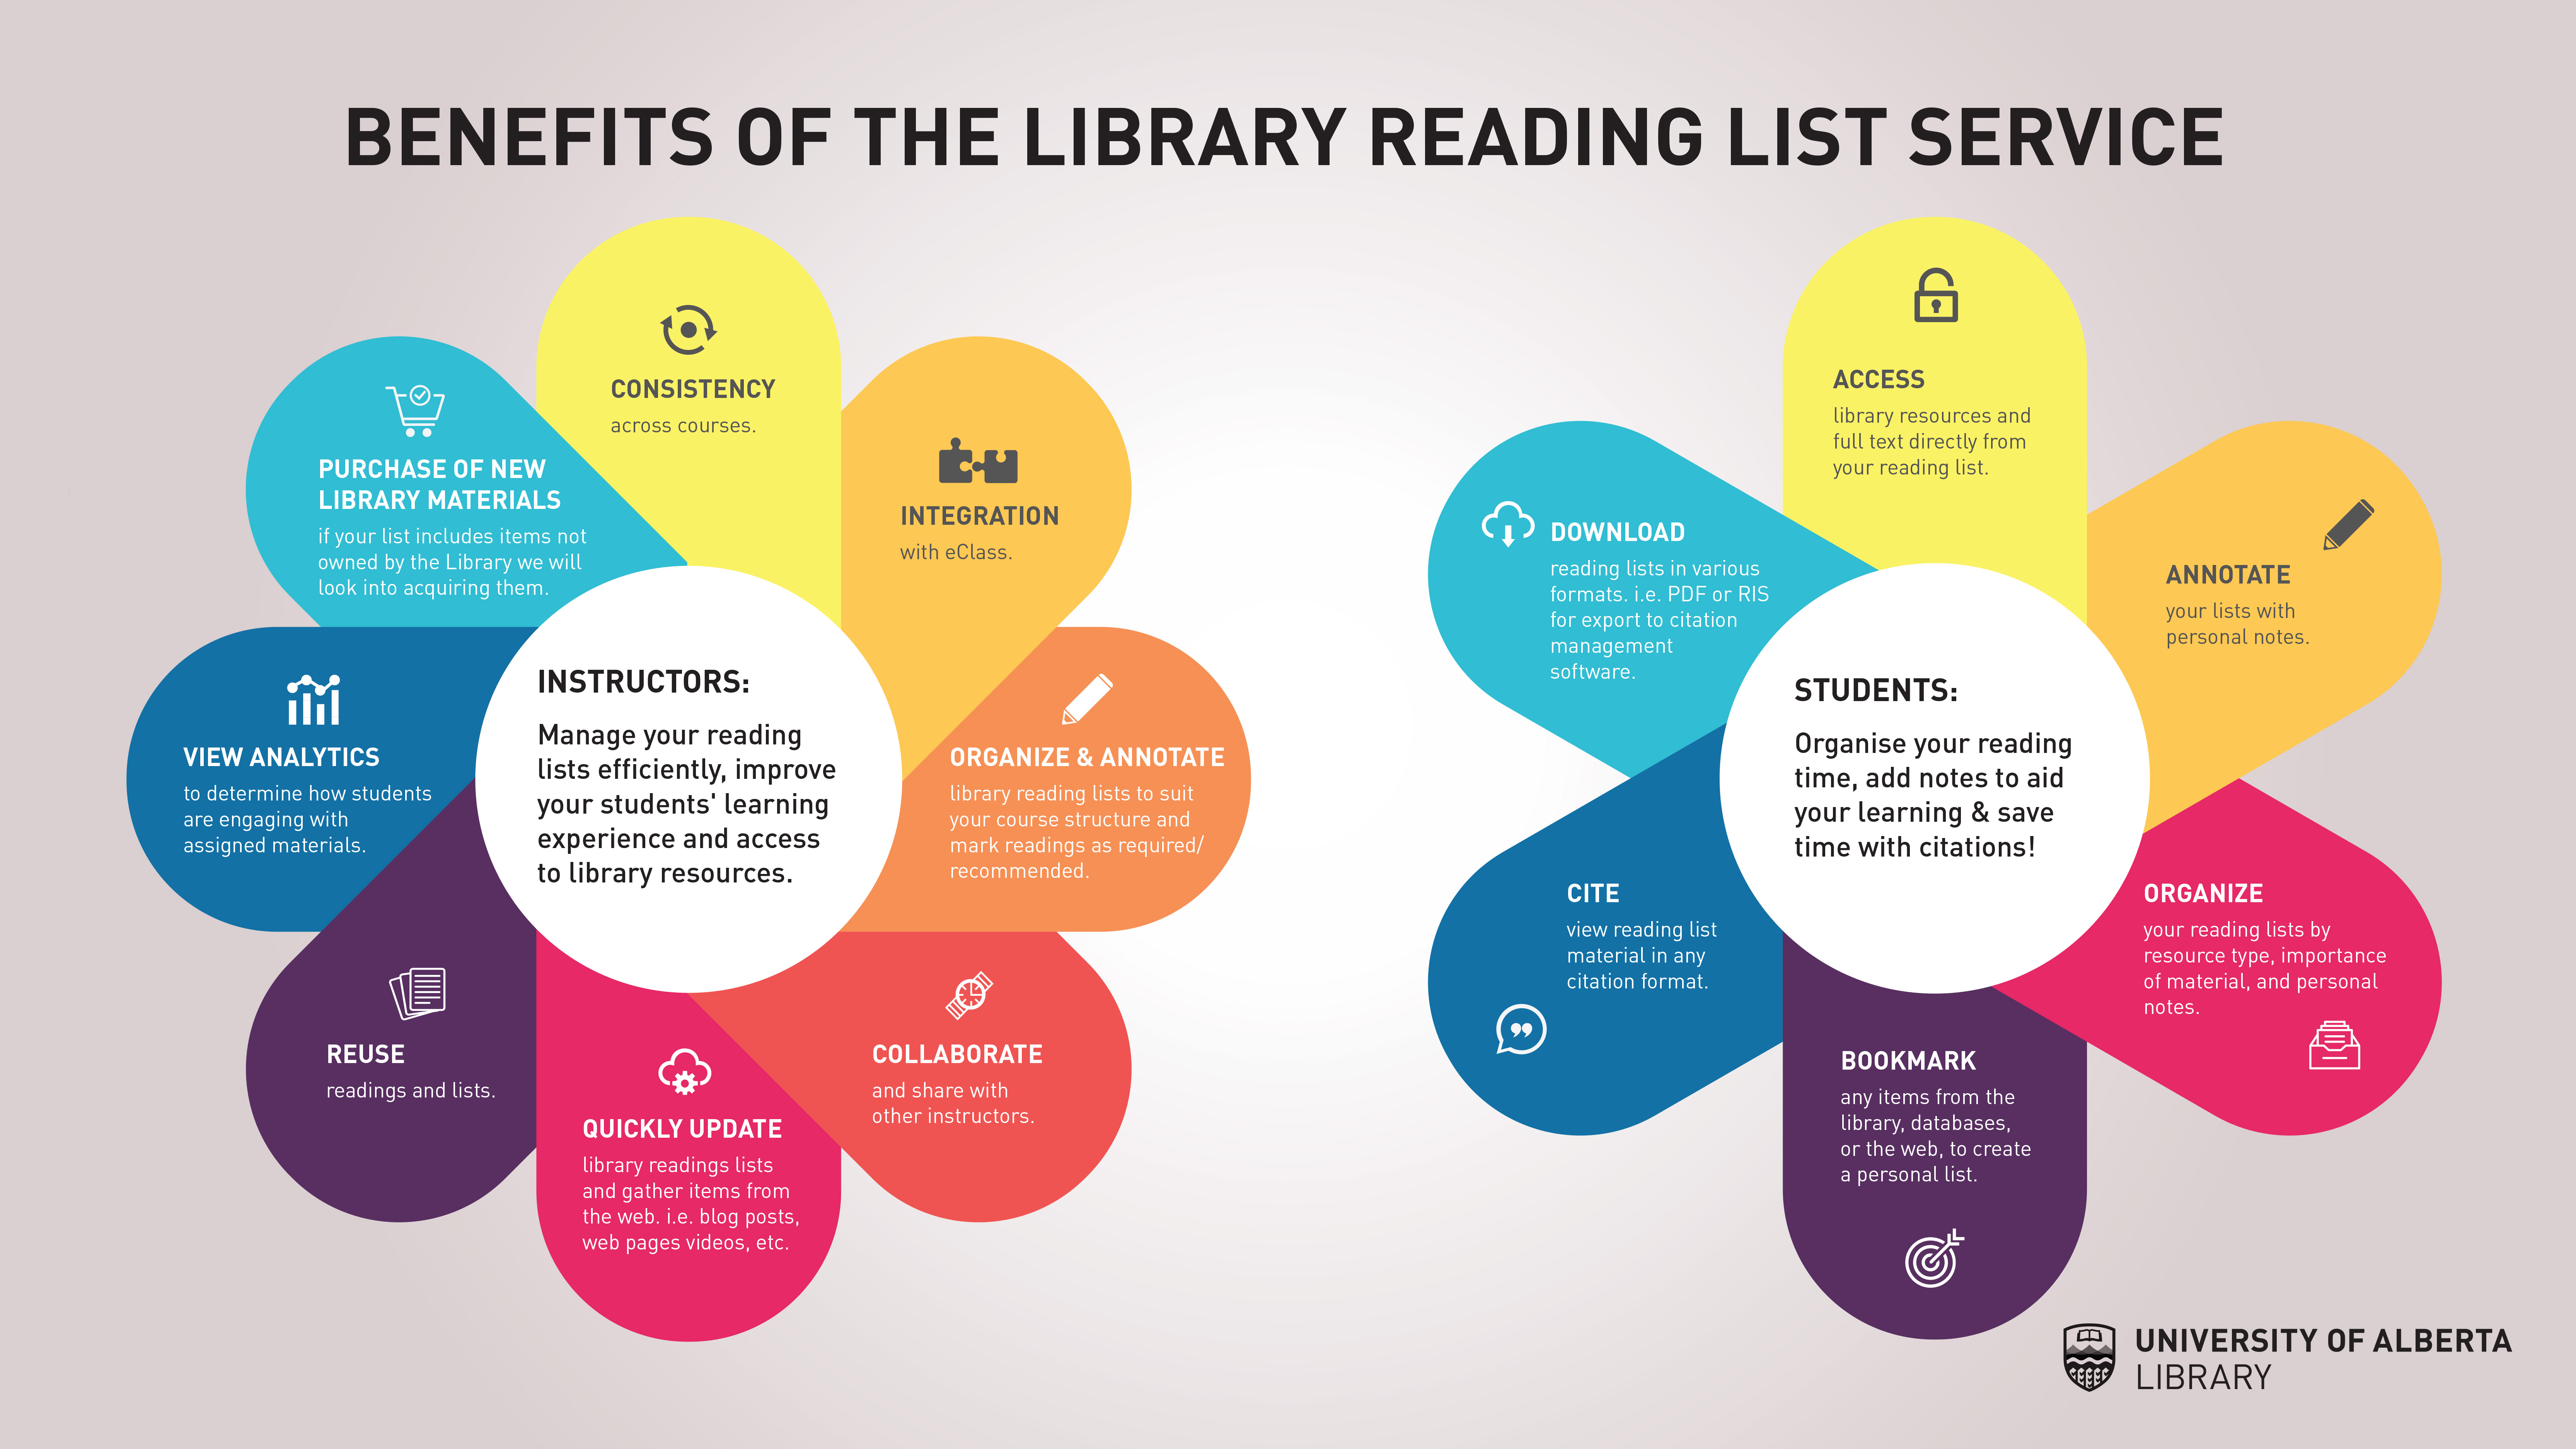 Library Learning: Using the New Reading List Service